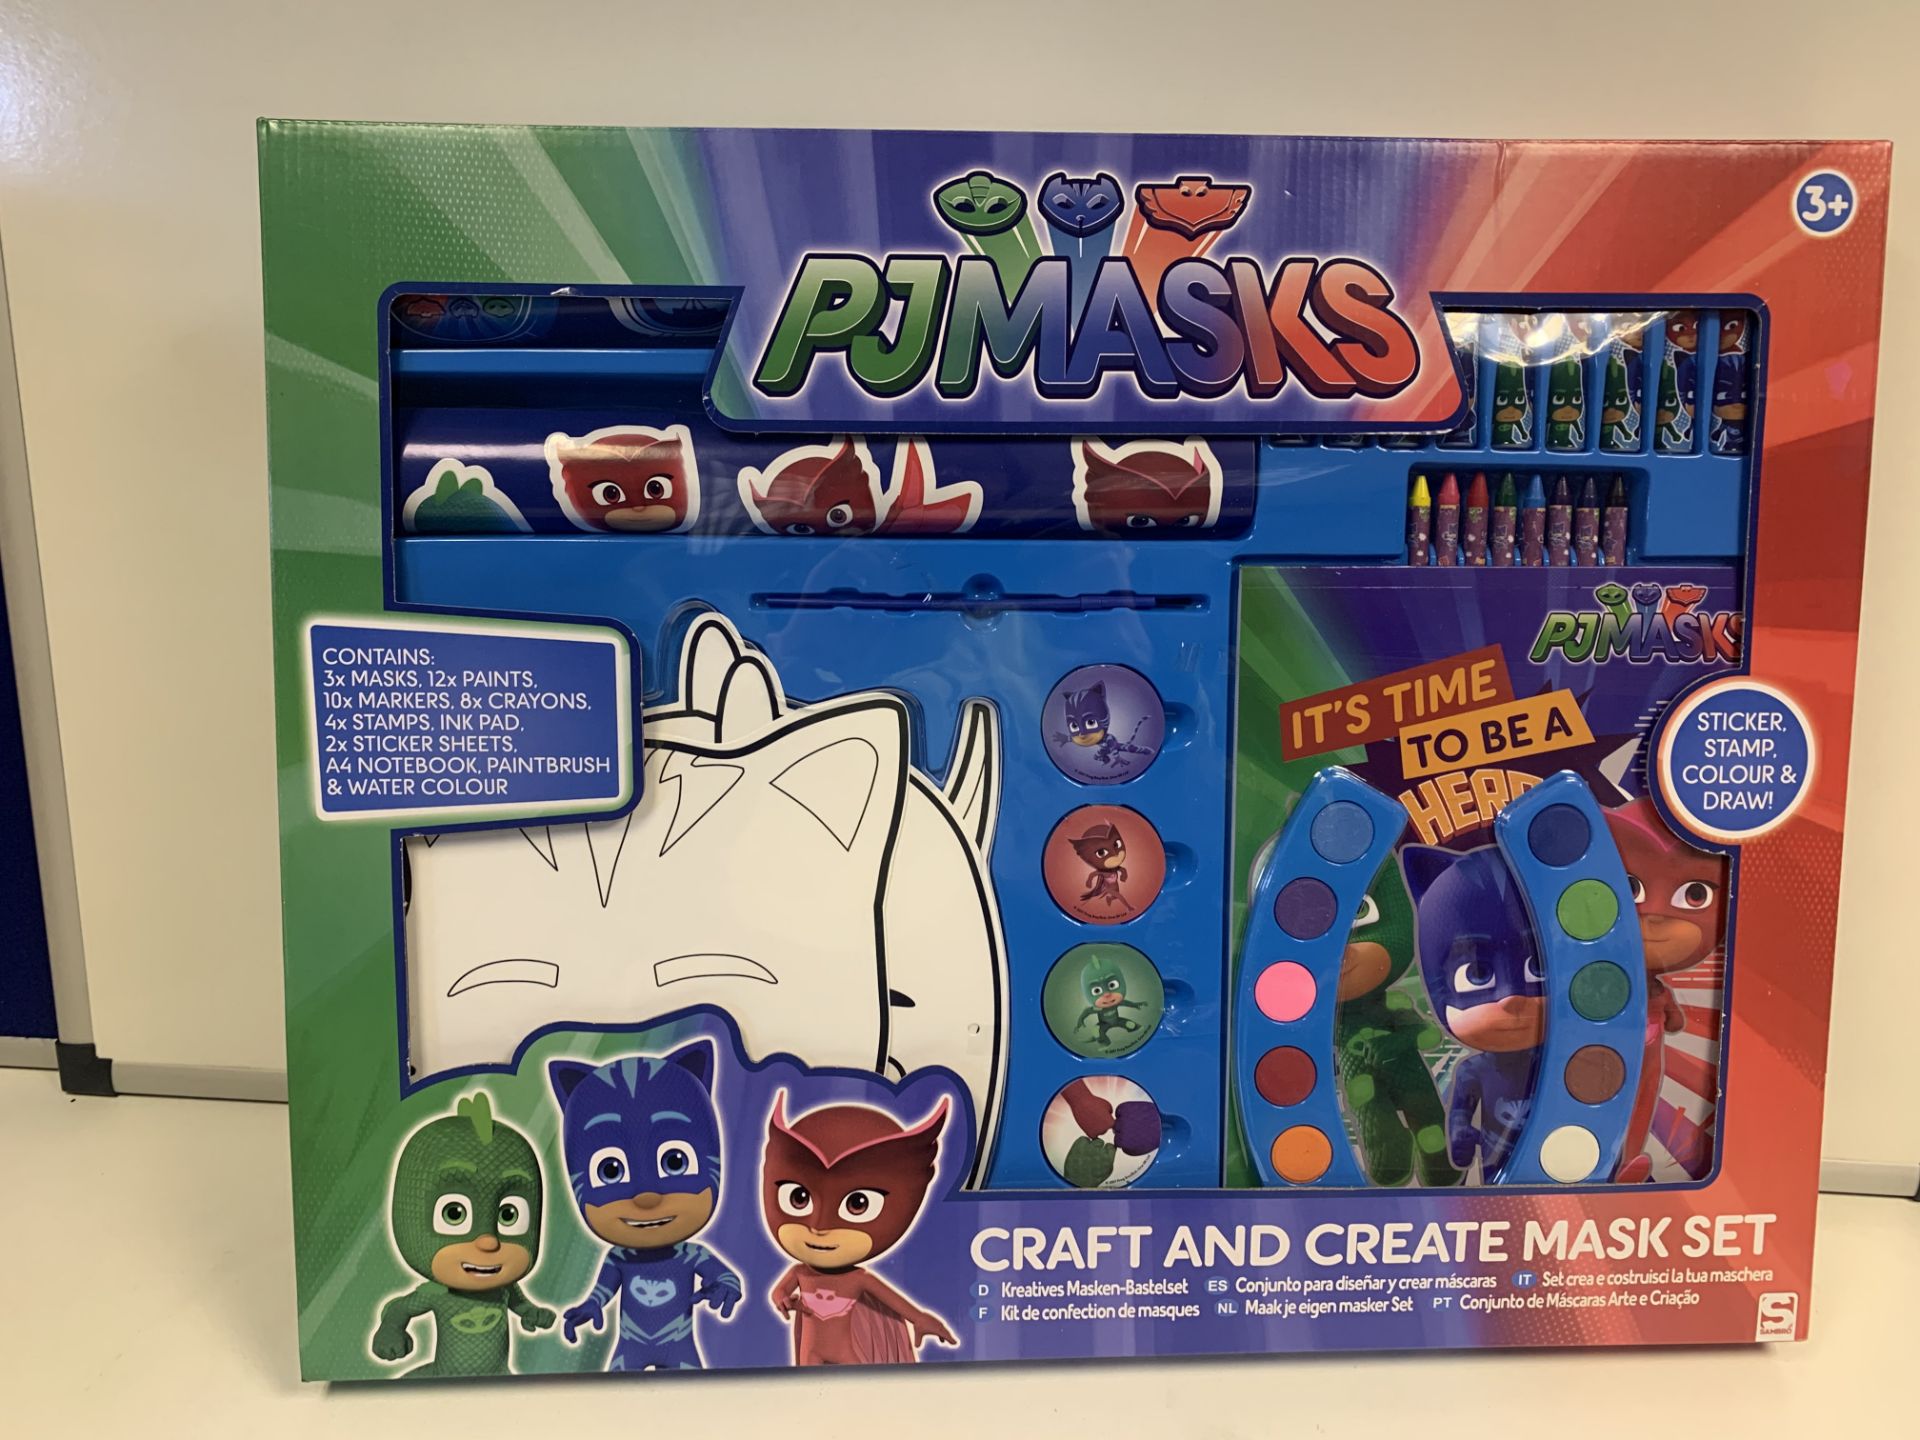 18 X BRAND NEW BOXED PJ MASKS LARGE CRAFT AND CREATE MASK SETS IN 3 BOXES